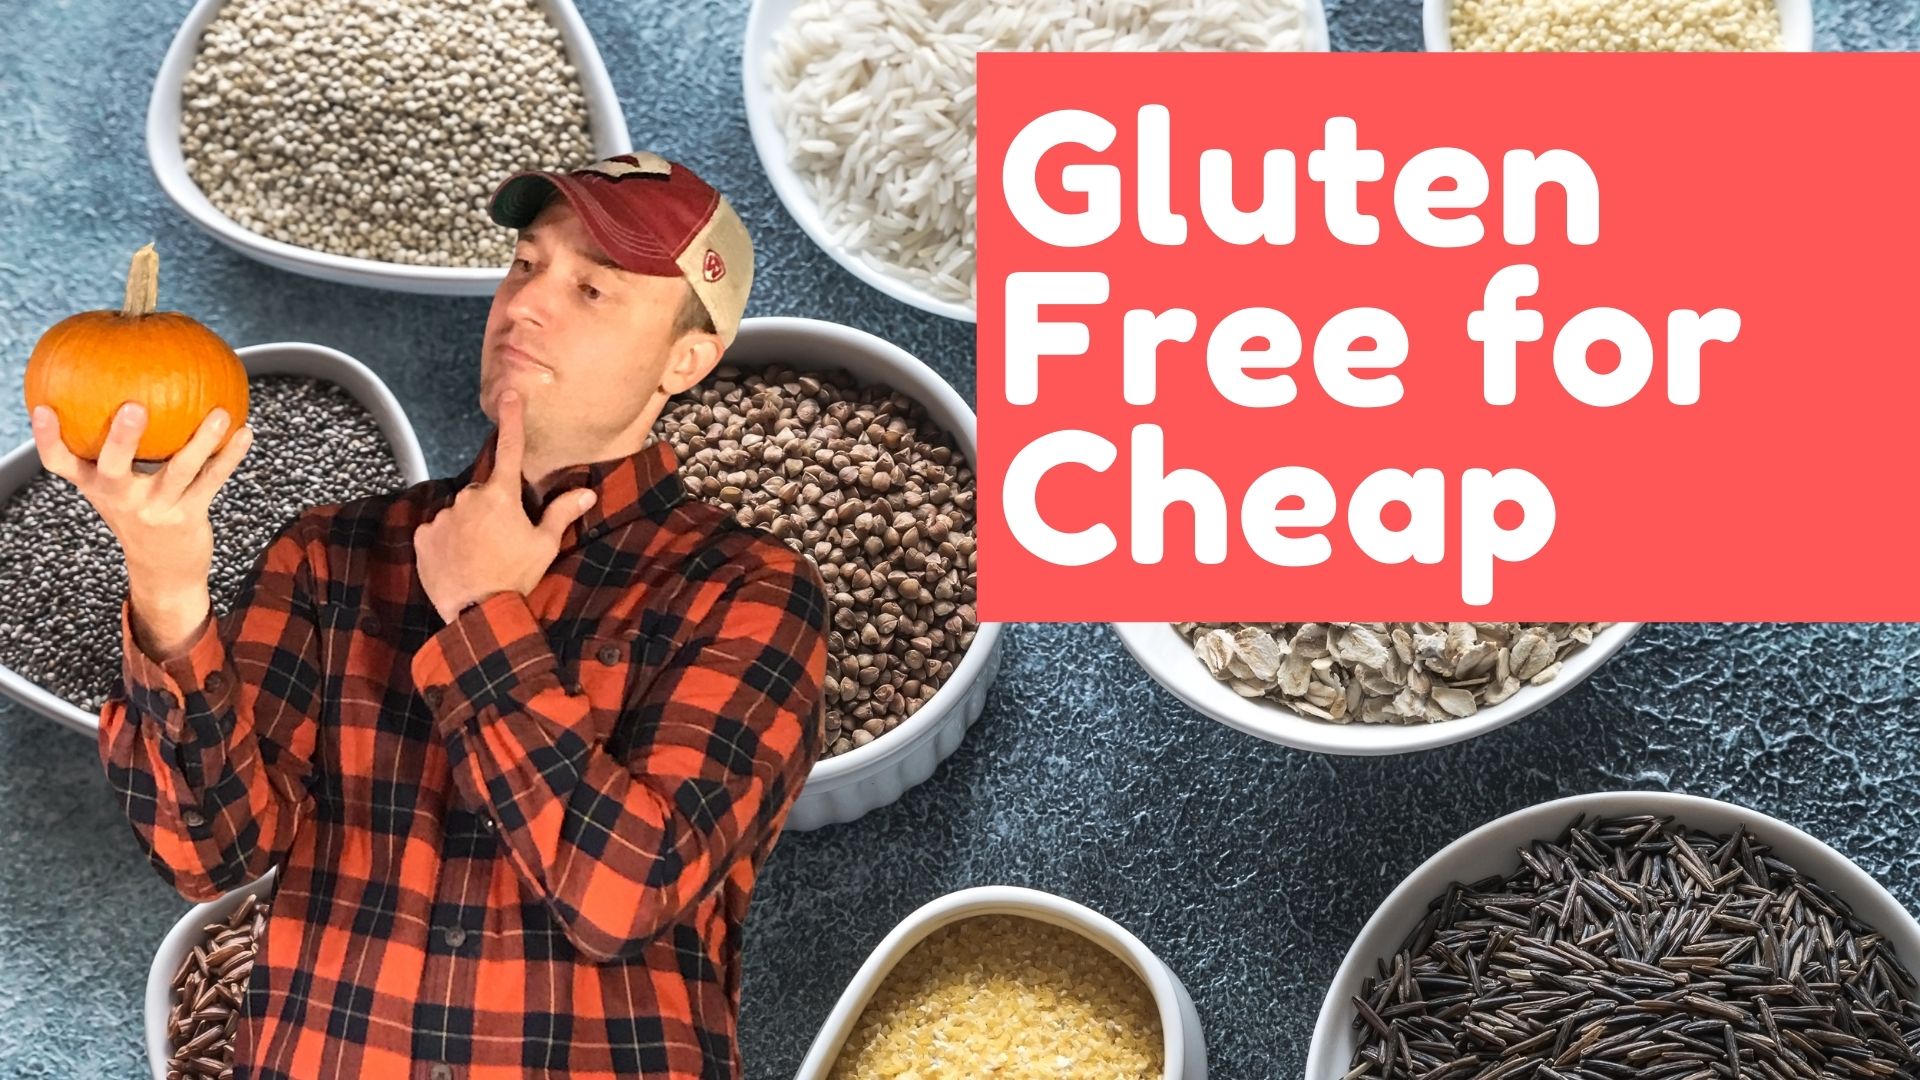 Gluten Free Meal Plan On A Budget: How We Feed Our Family Of 5 For $1.50 Per Person Per Meal